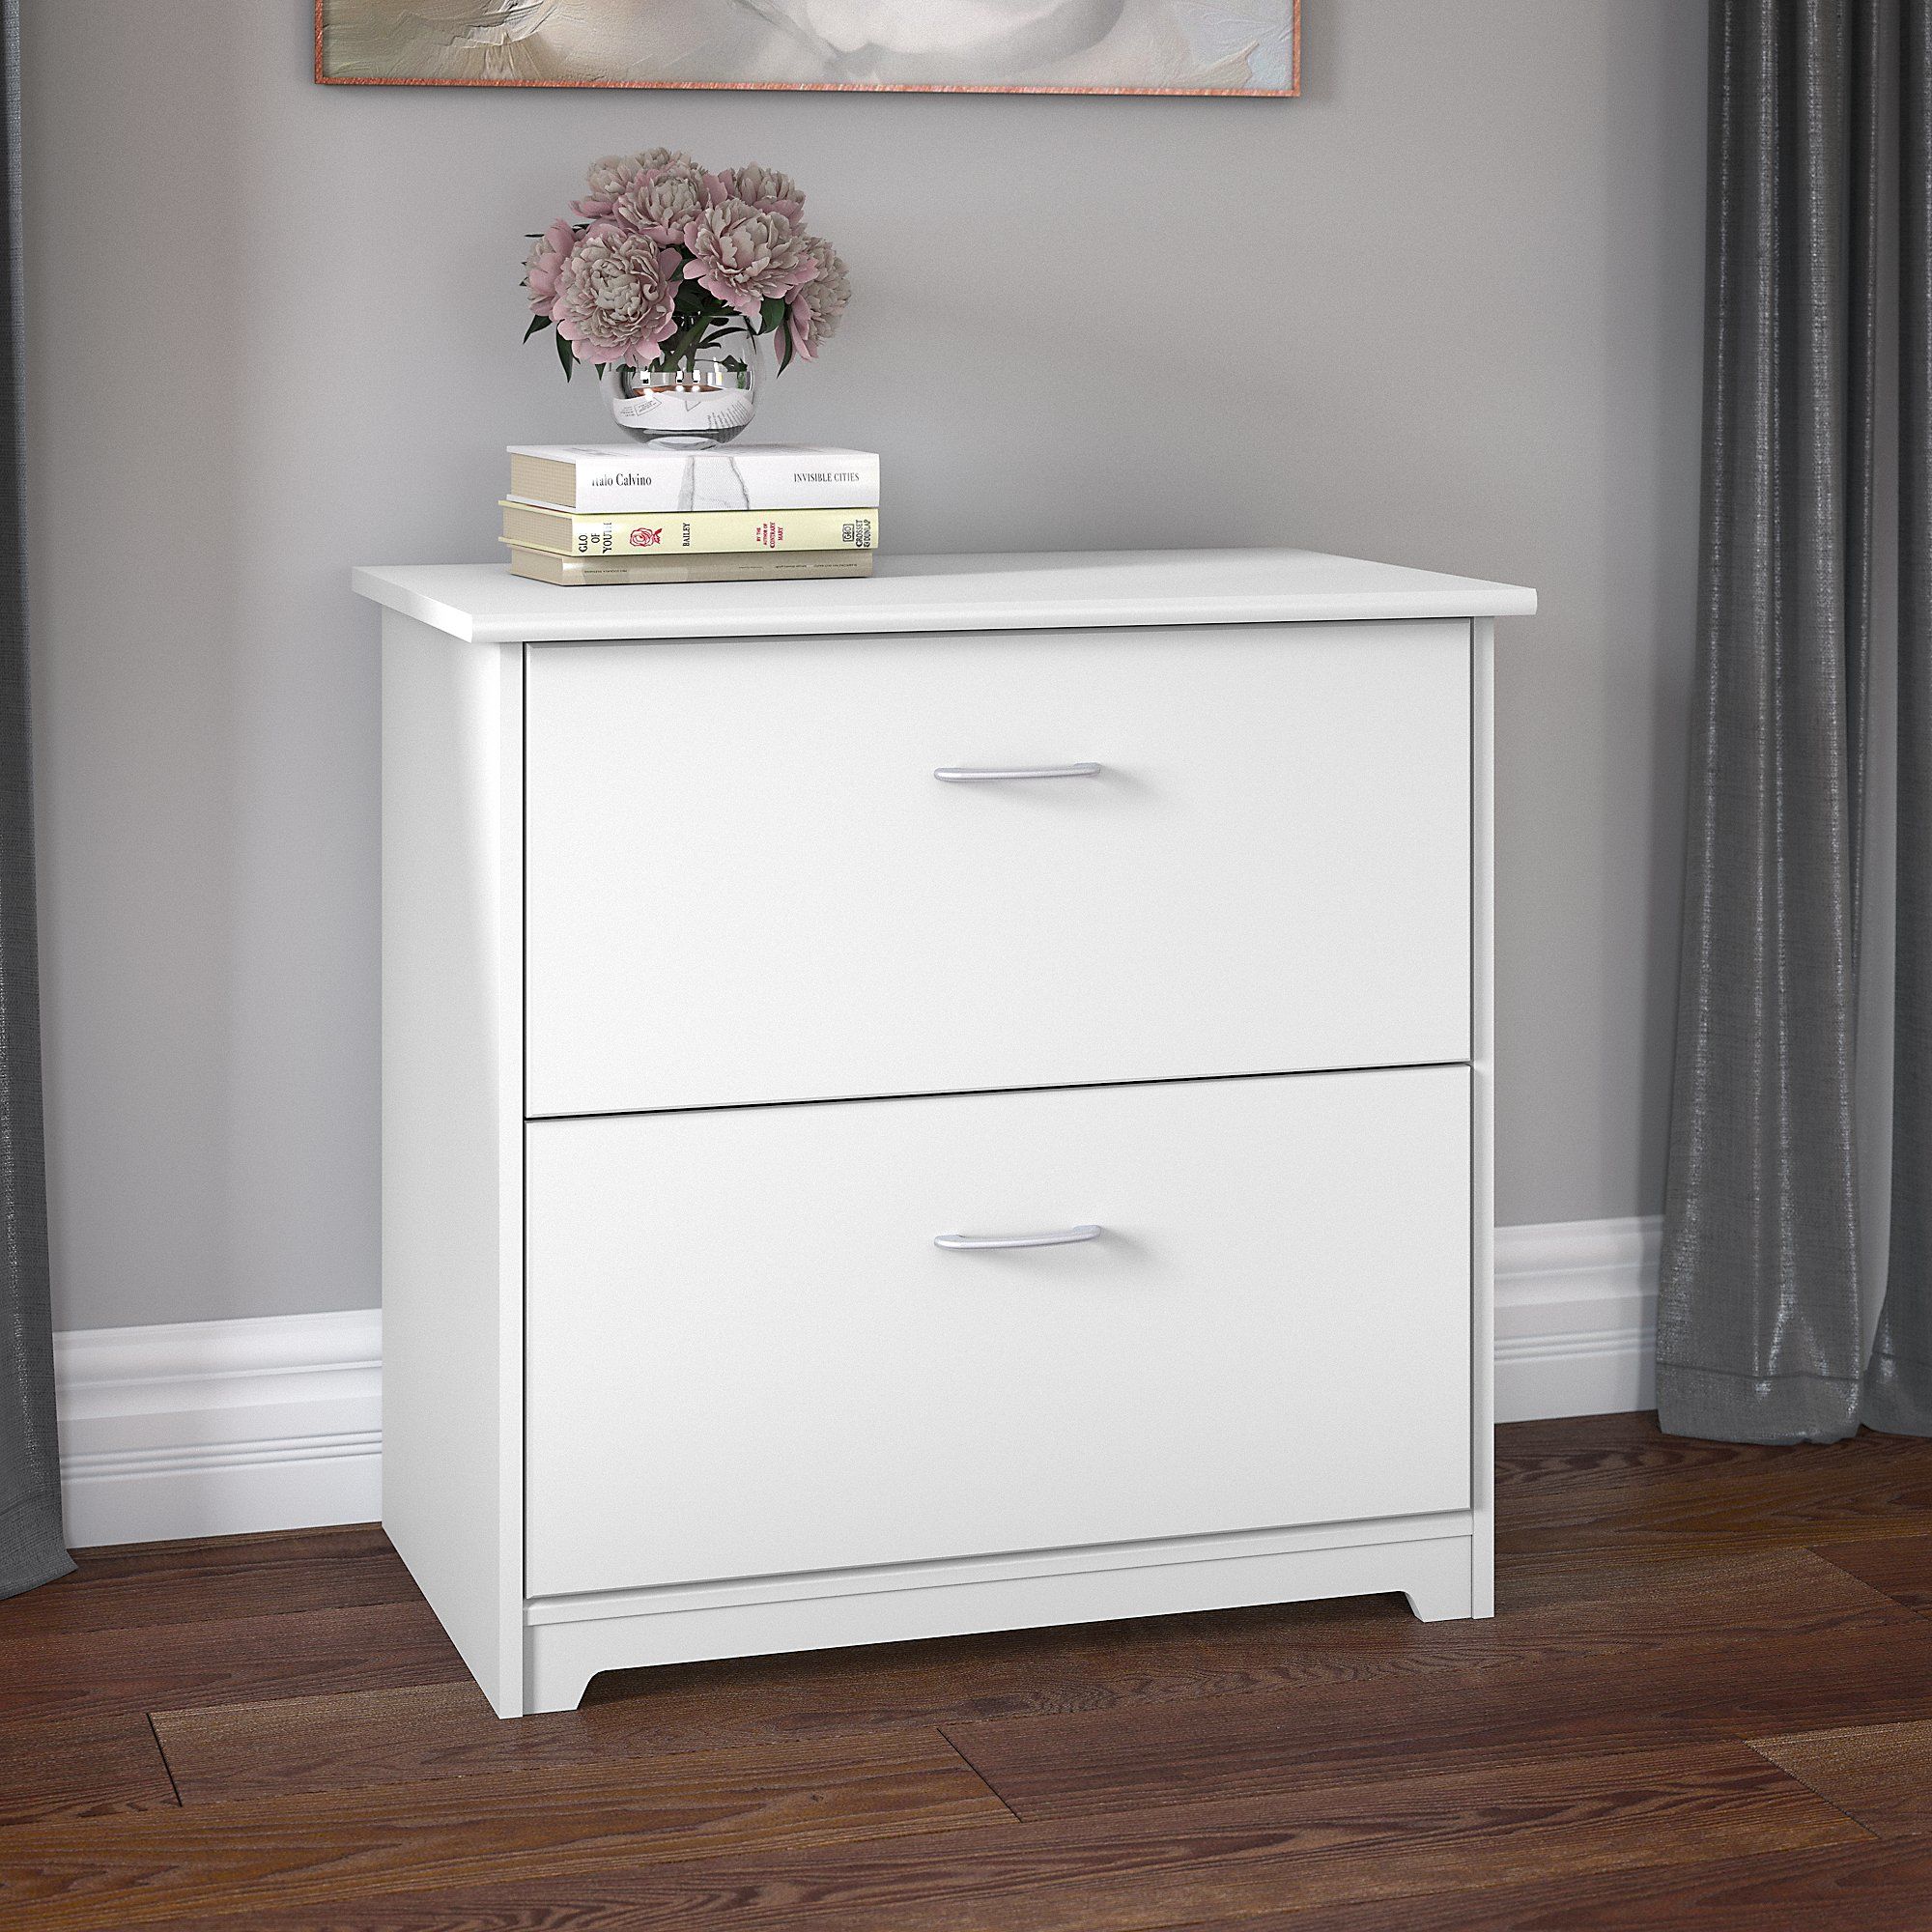 2 Drawer Lateral File Cabinet in White